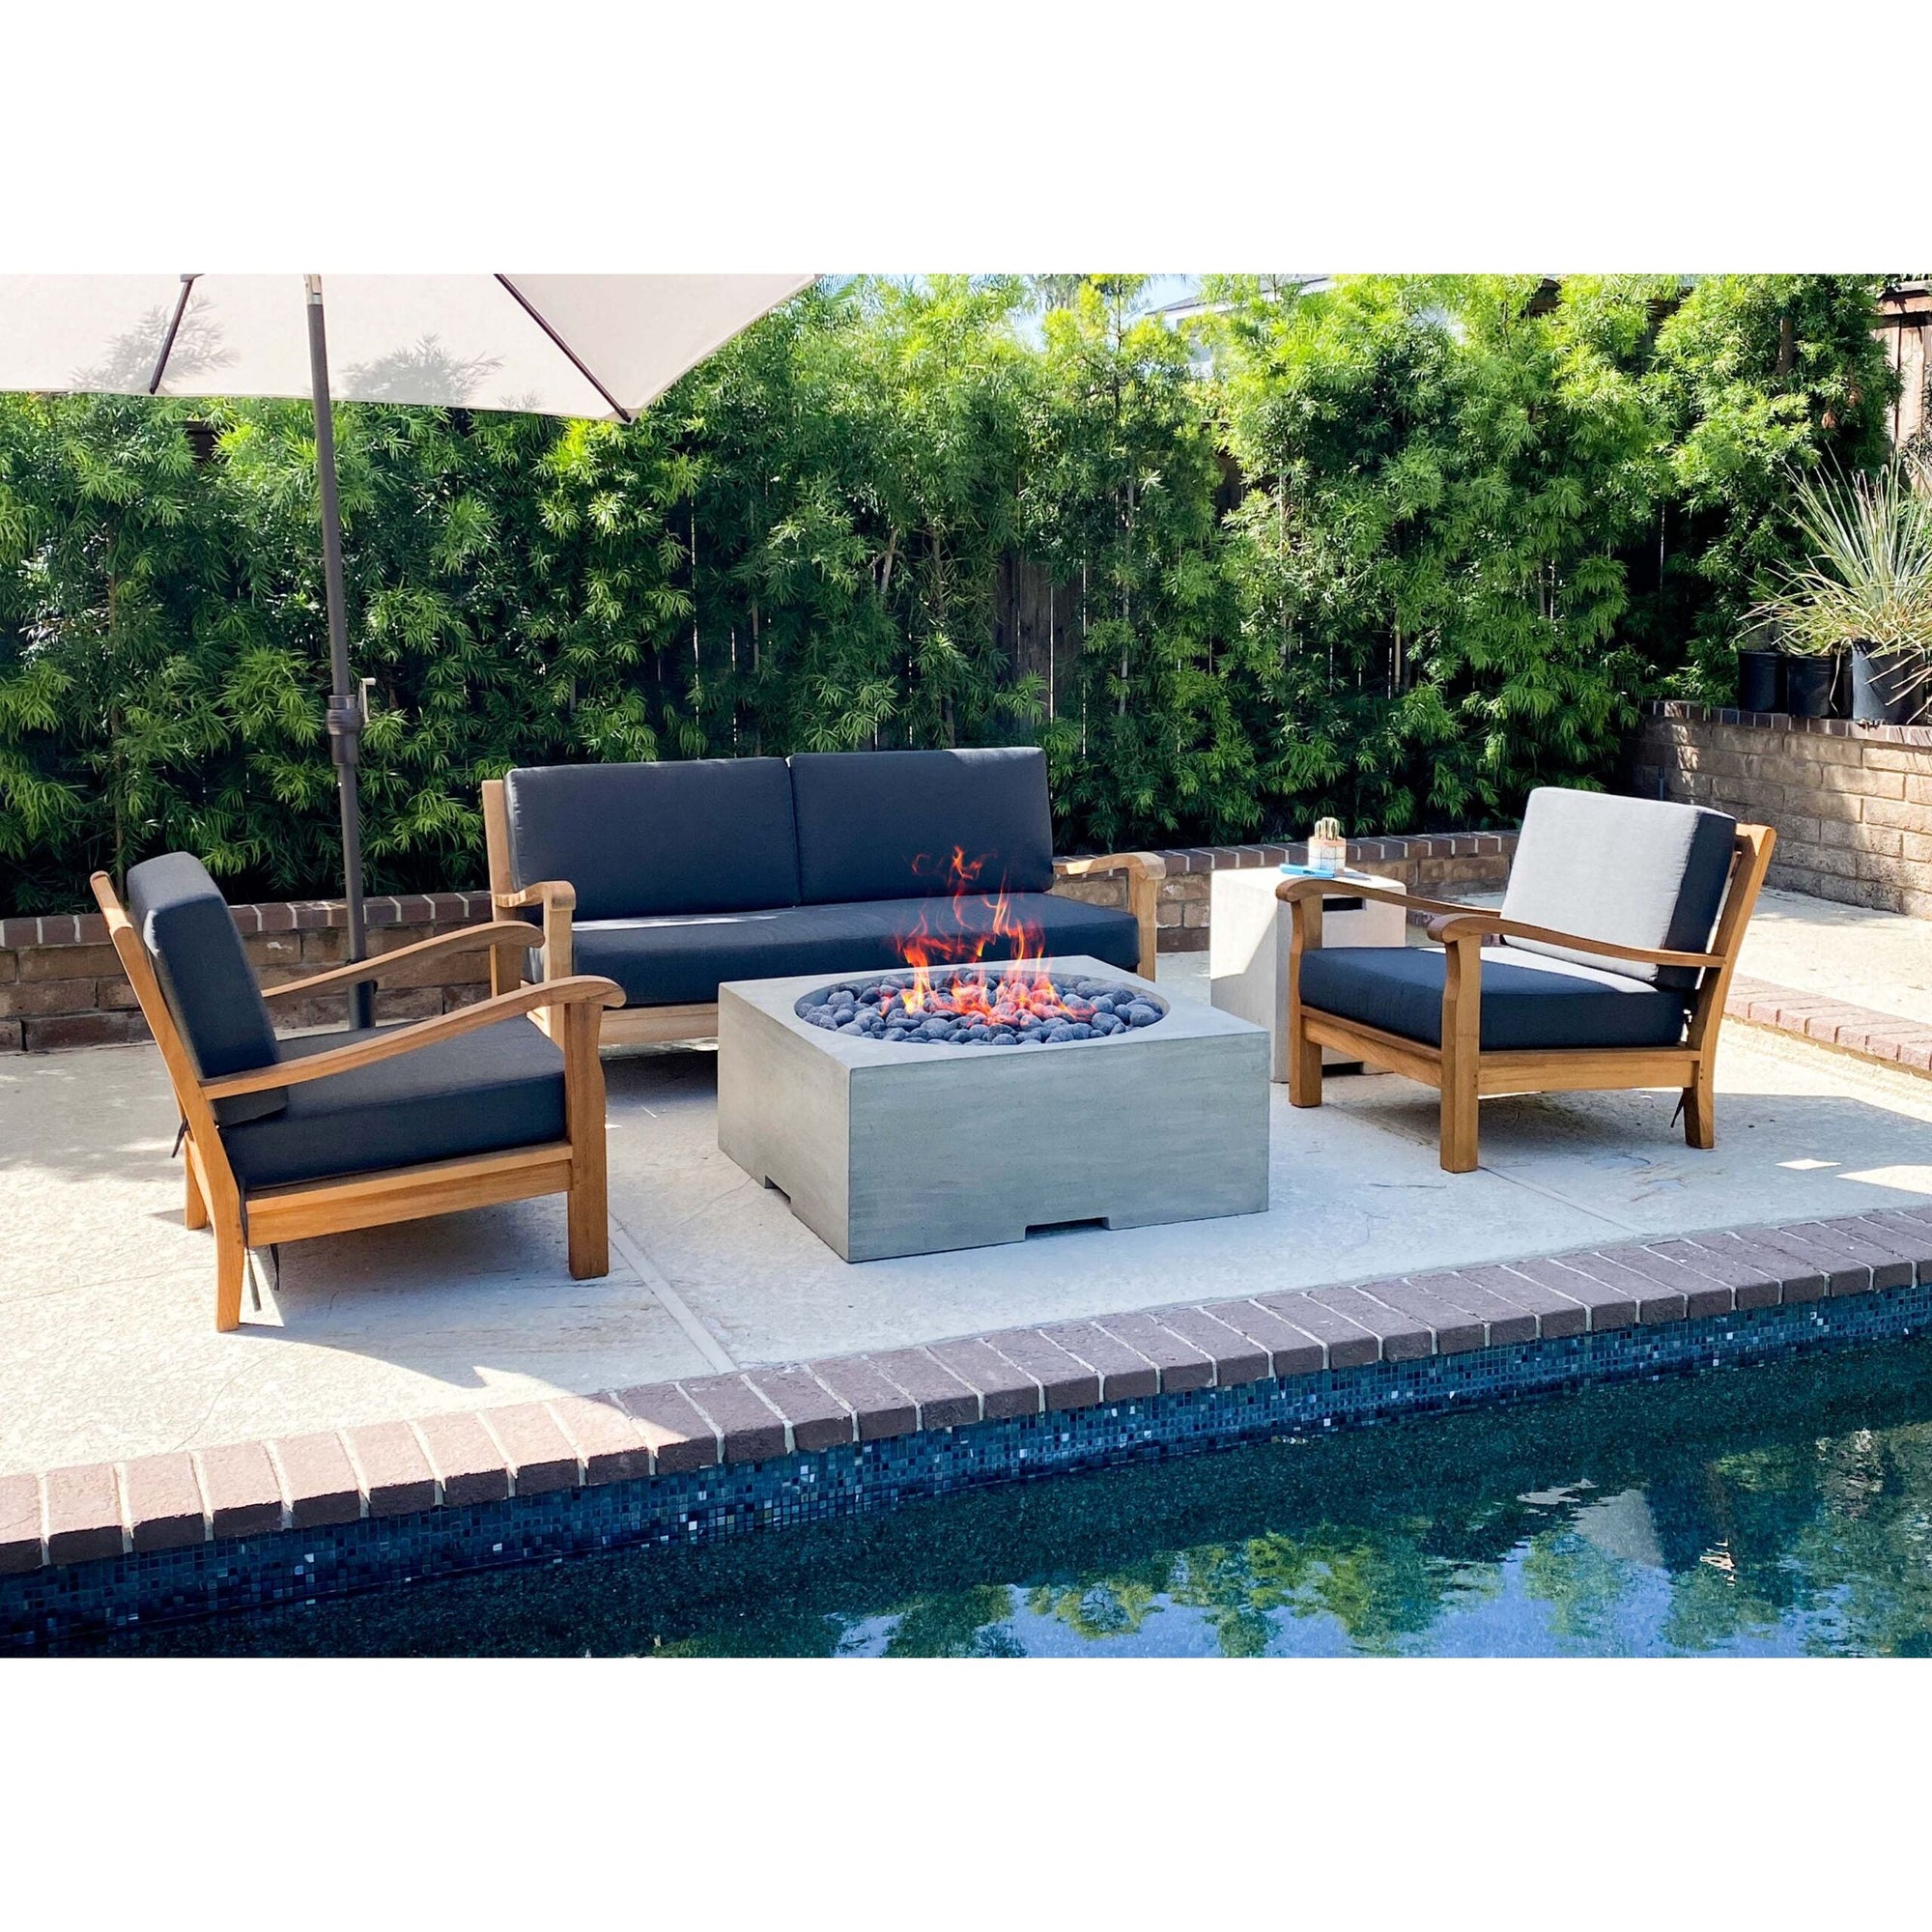 Piazza Fire Table in GFRC Concrete by Prism Hardscapes - Majestic Fountains and More